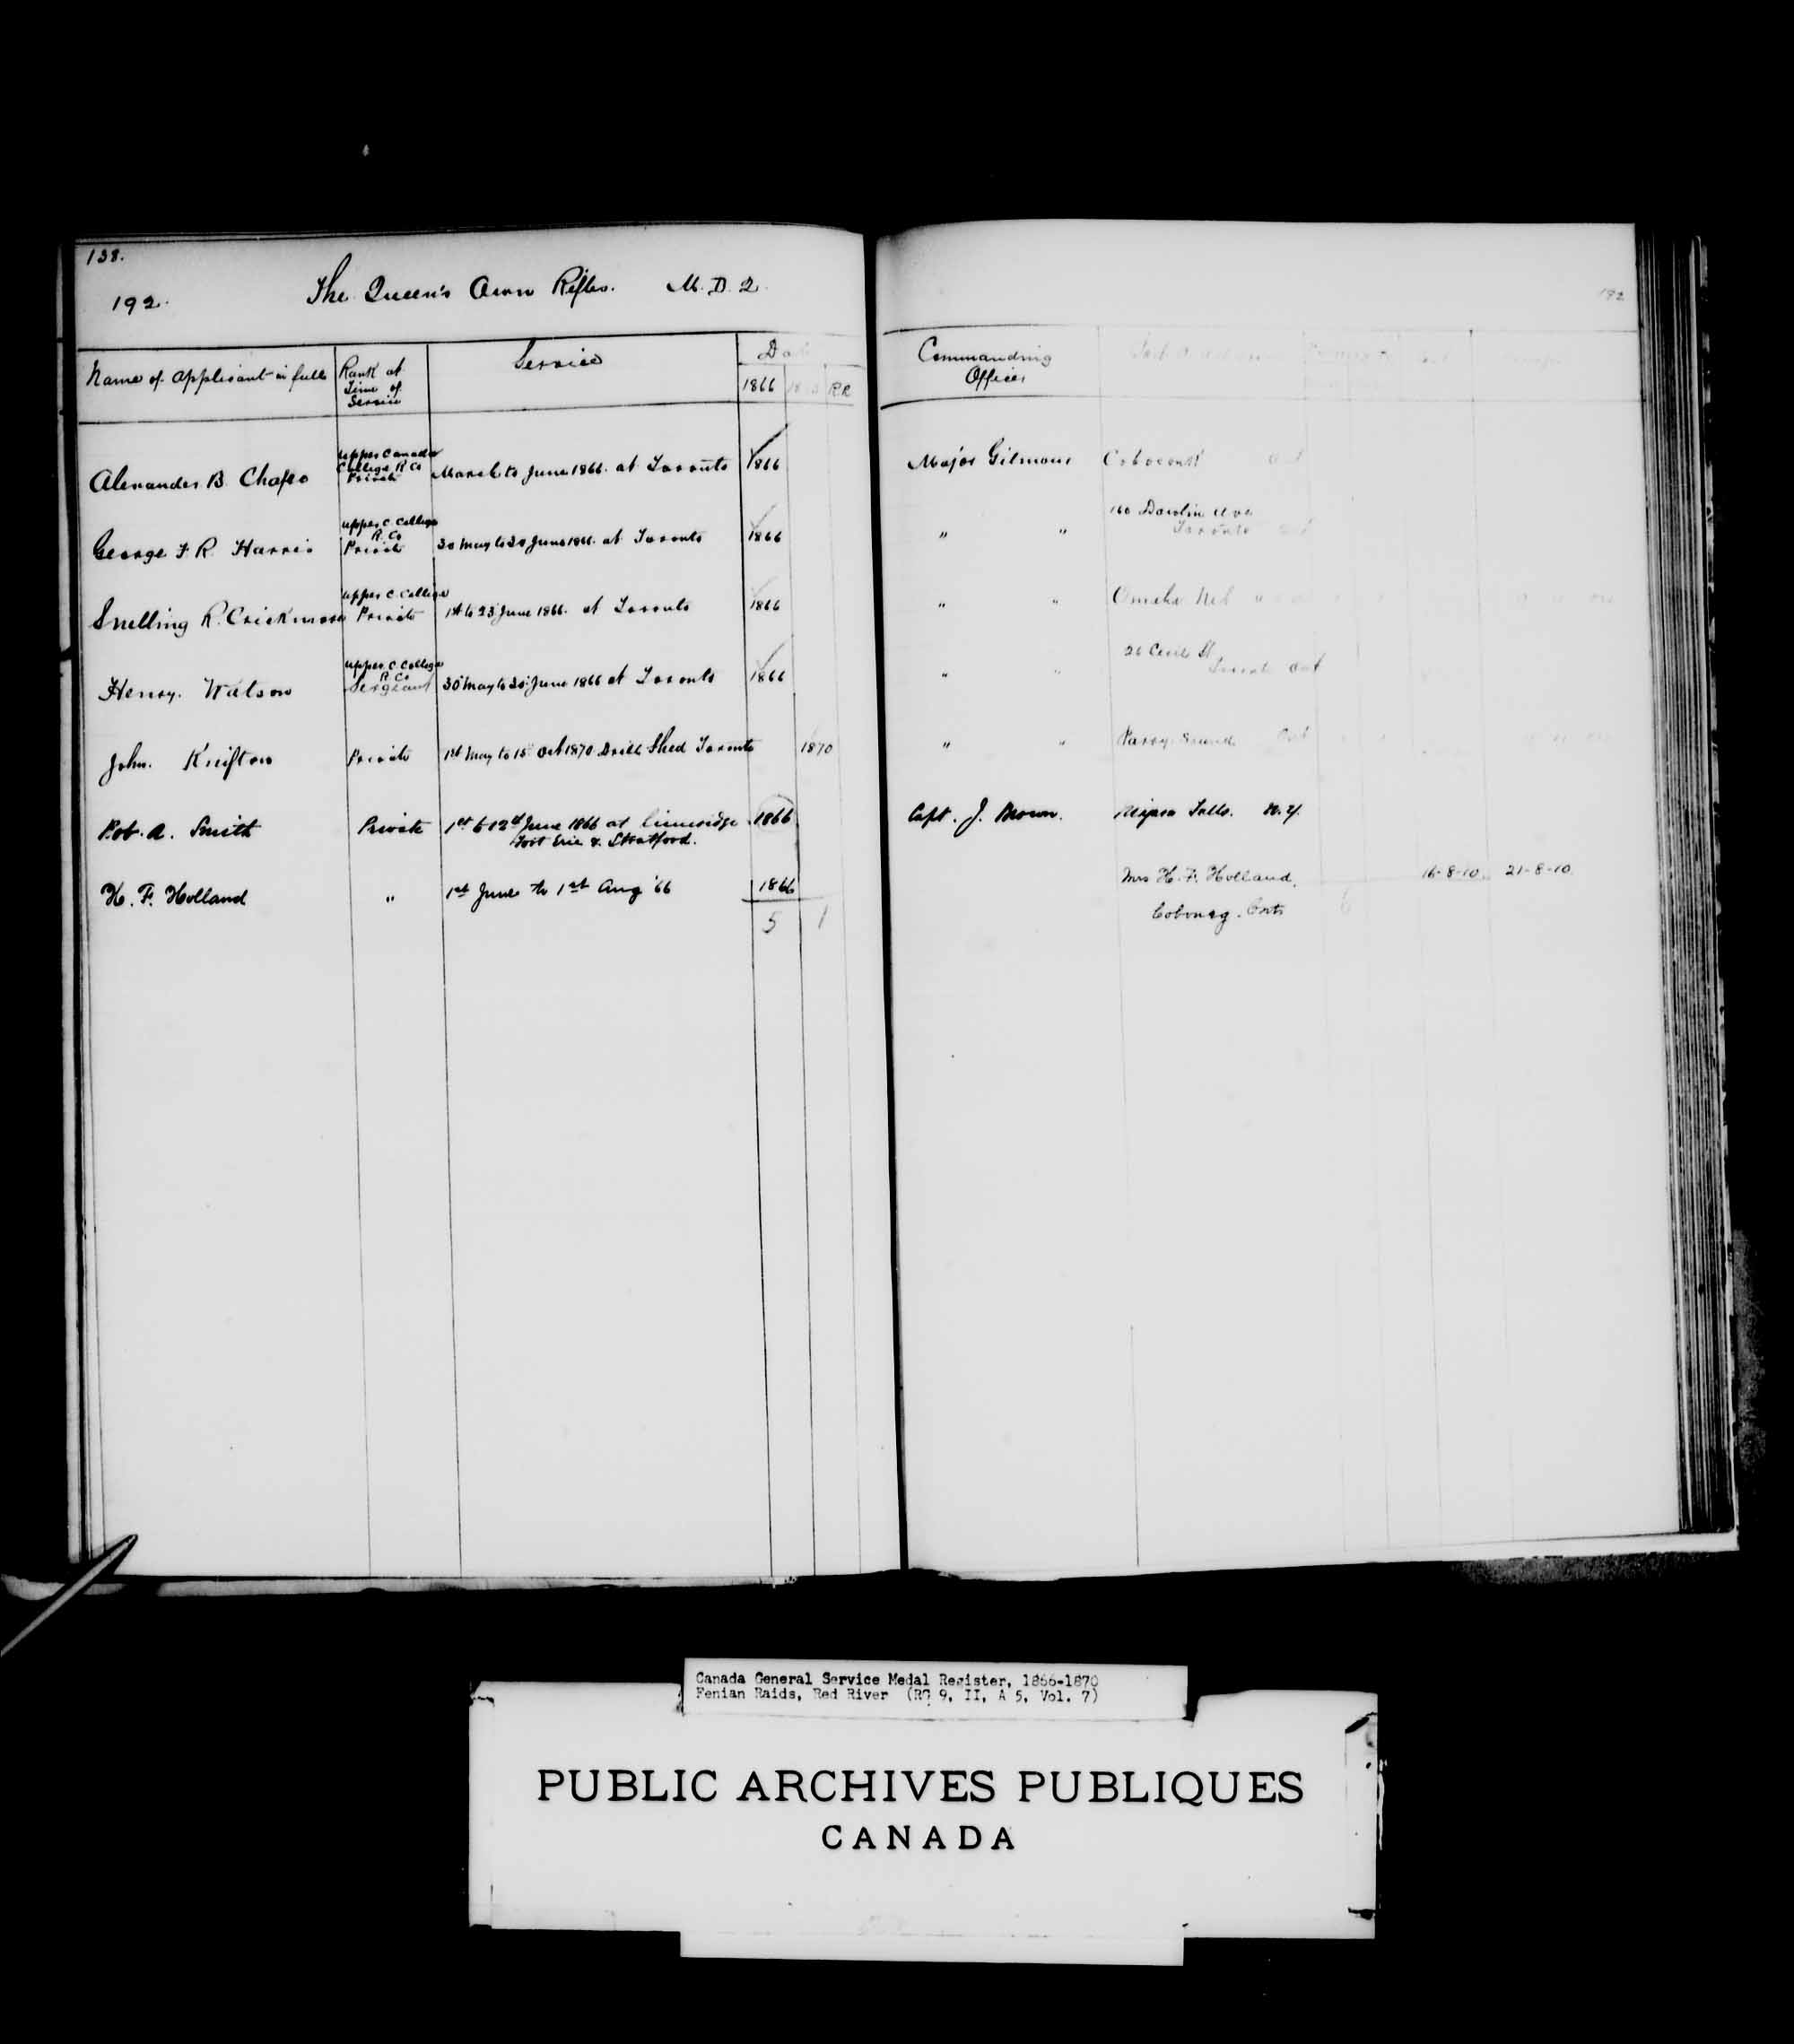 Digitized page of Medals, Honours and Awards for Image No.: e008682902